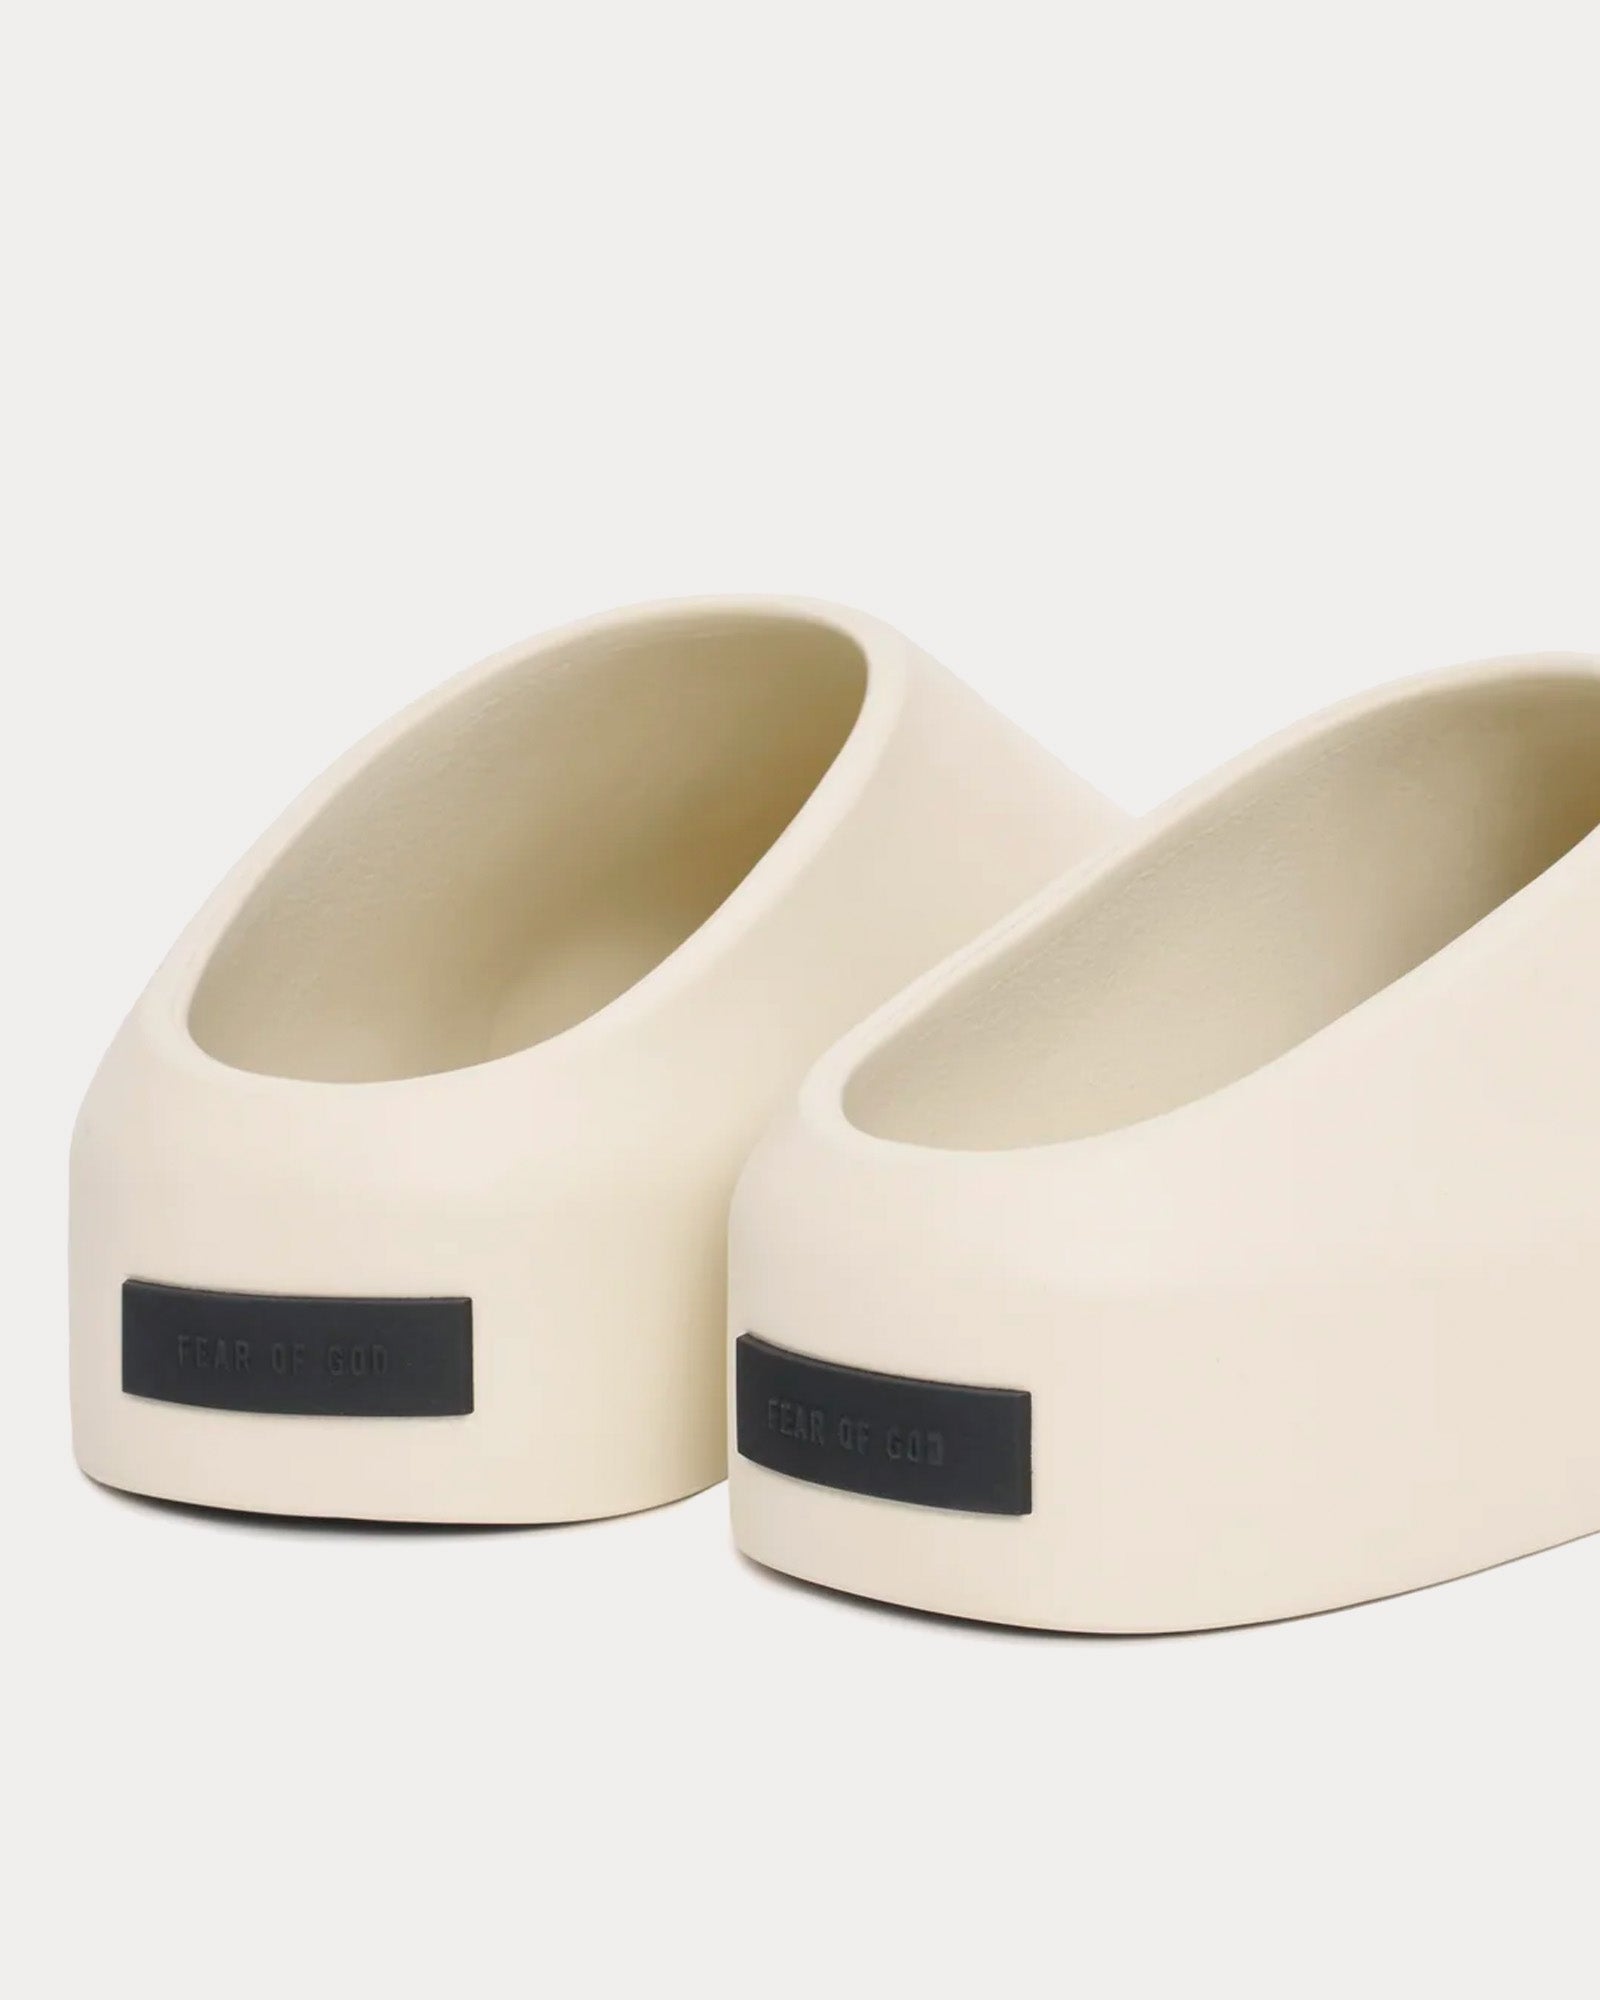 Fear of God - California Collection 8 Cream Mules